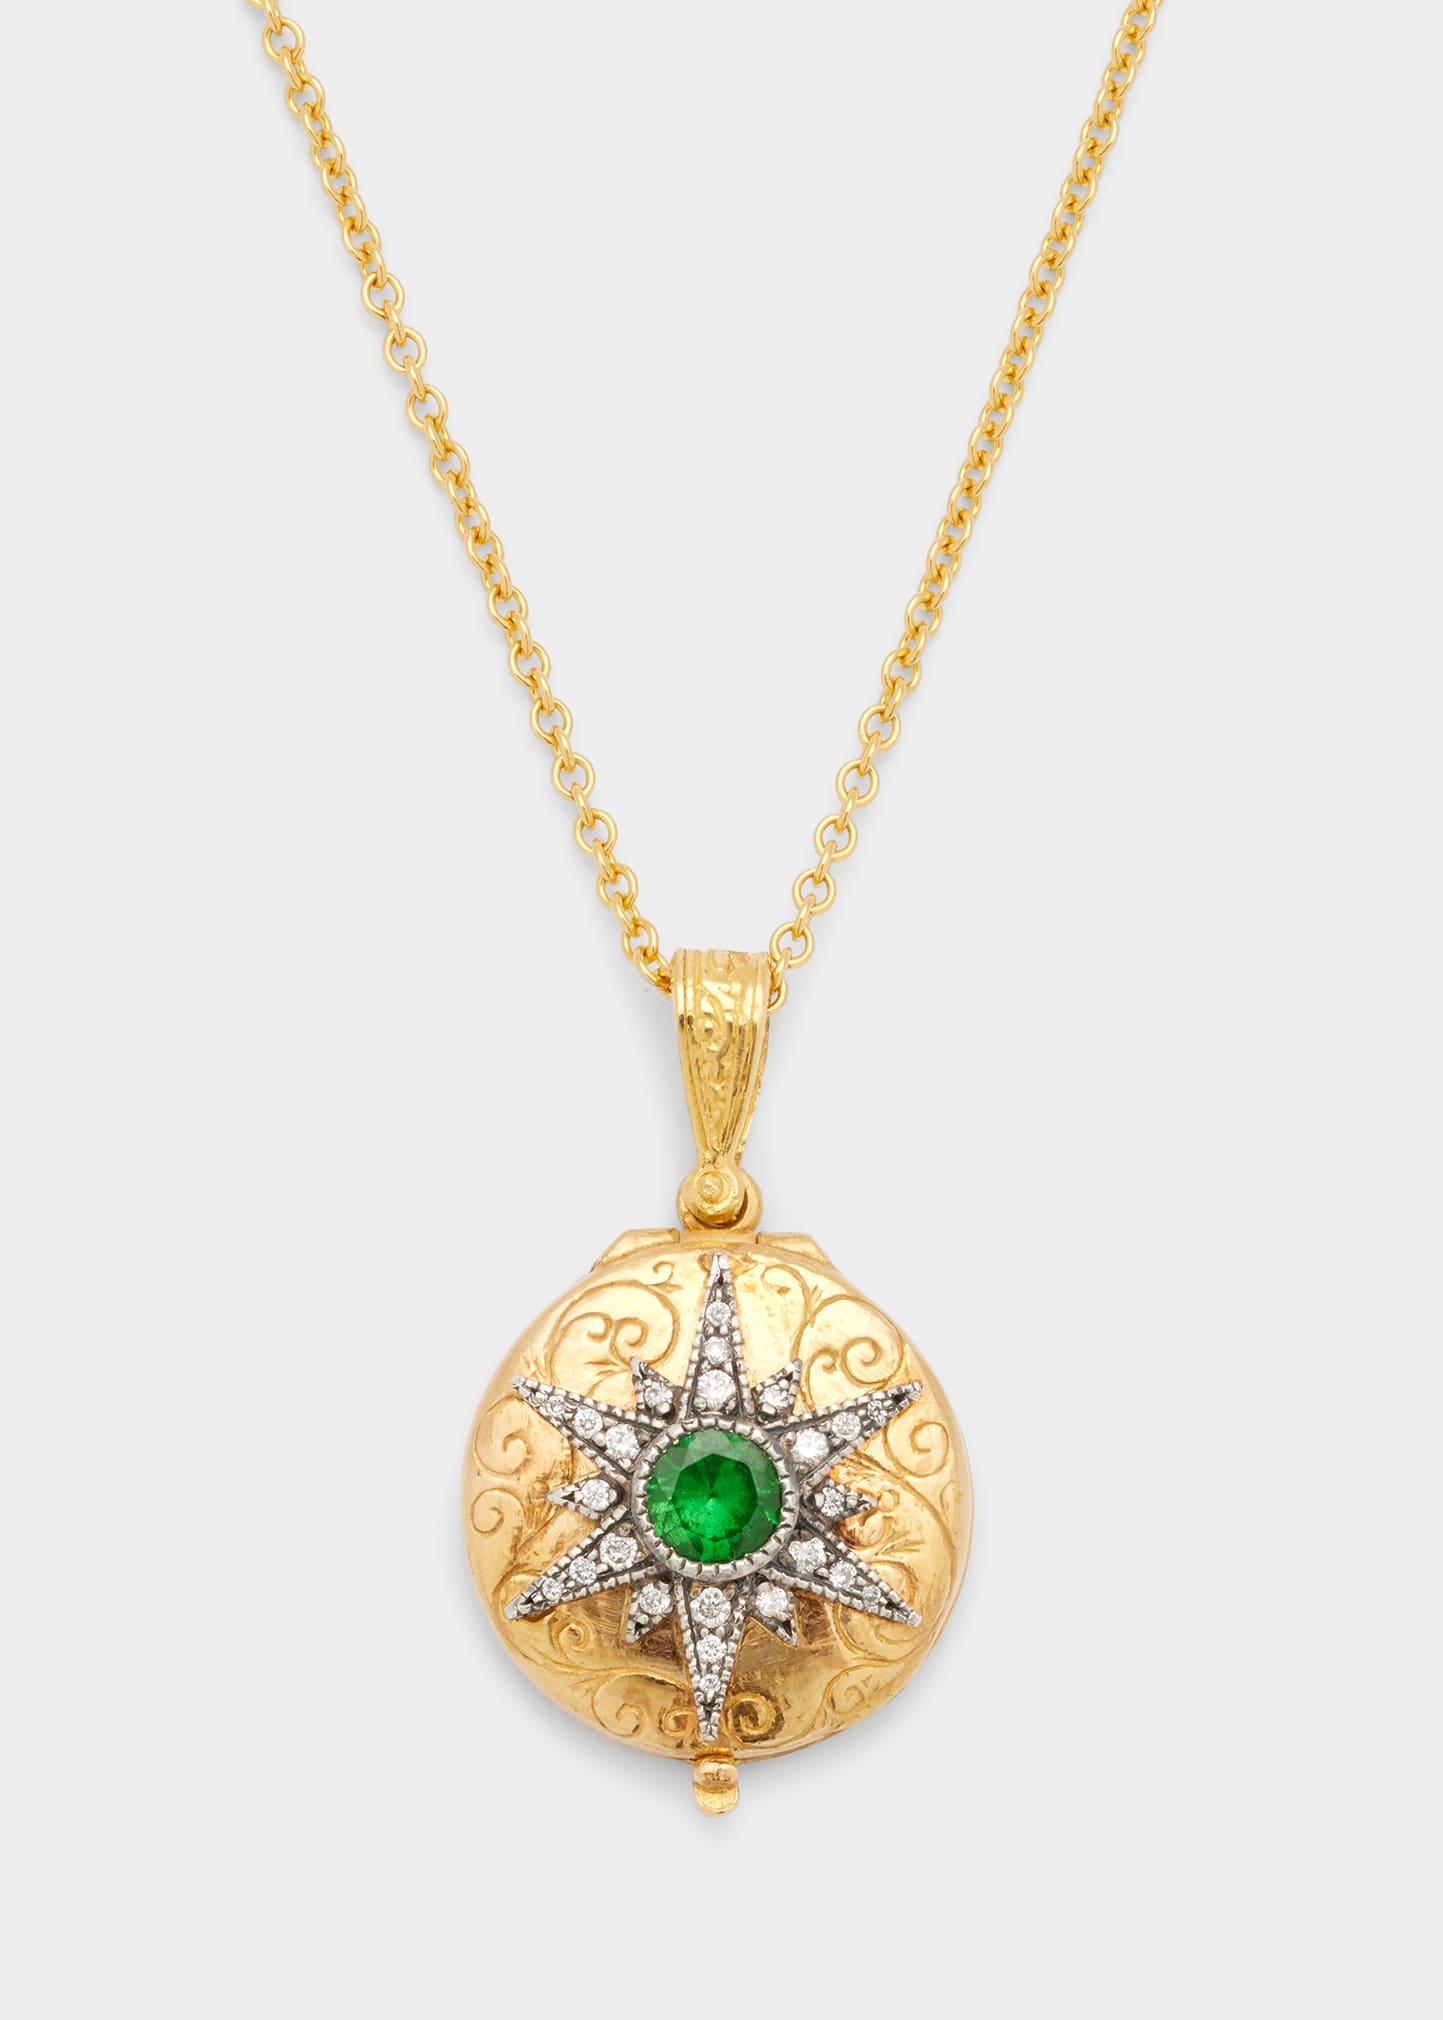 Small Starburst Locket Necklace with Emerald and Diamonds